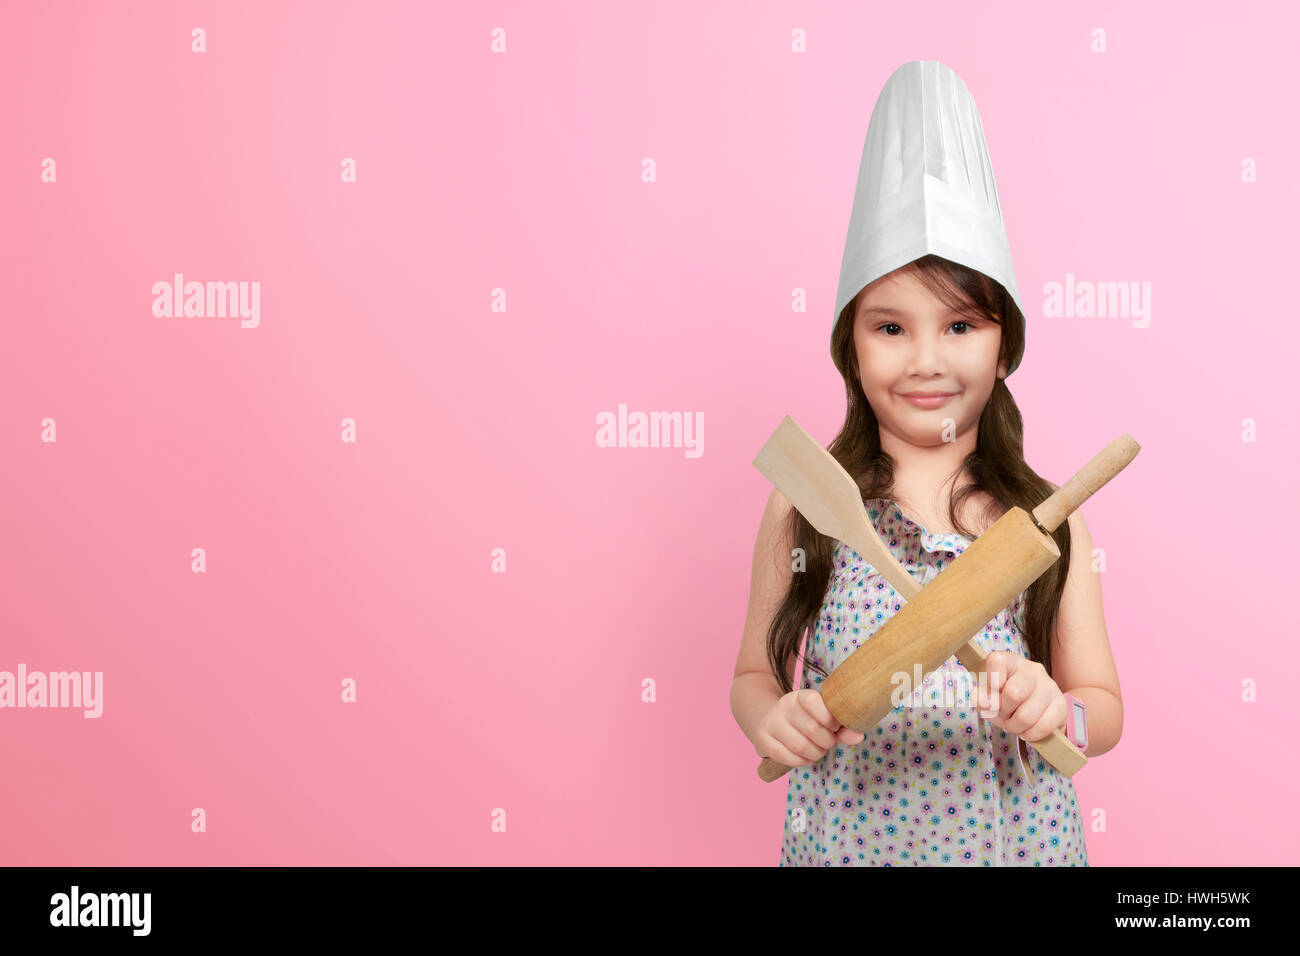 Smiling asian little girl in chef hat holding wooden cooking utensils over pink background Stock Photo